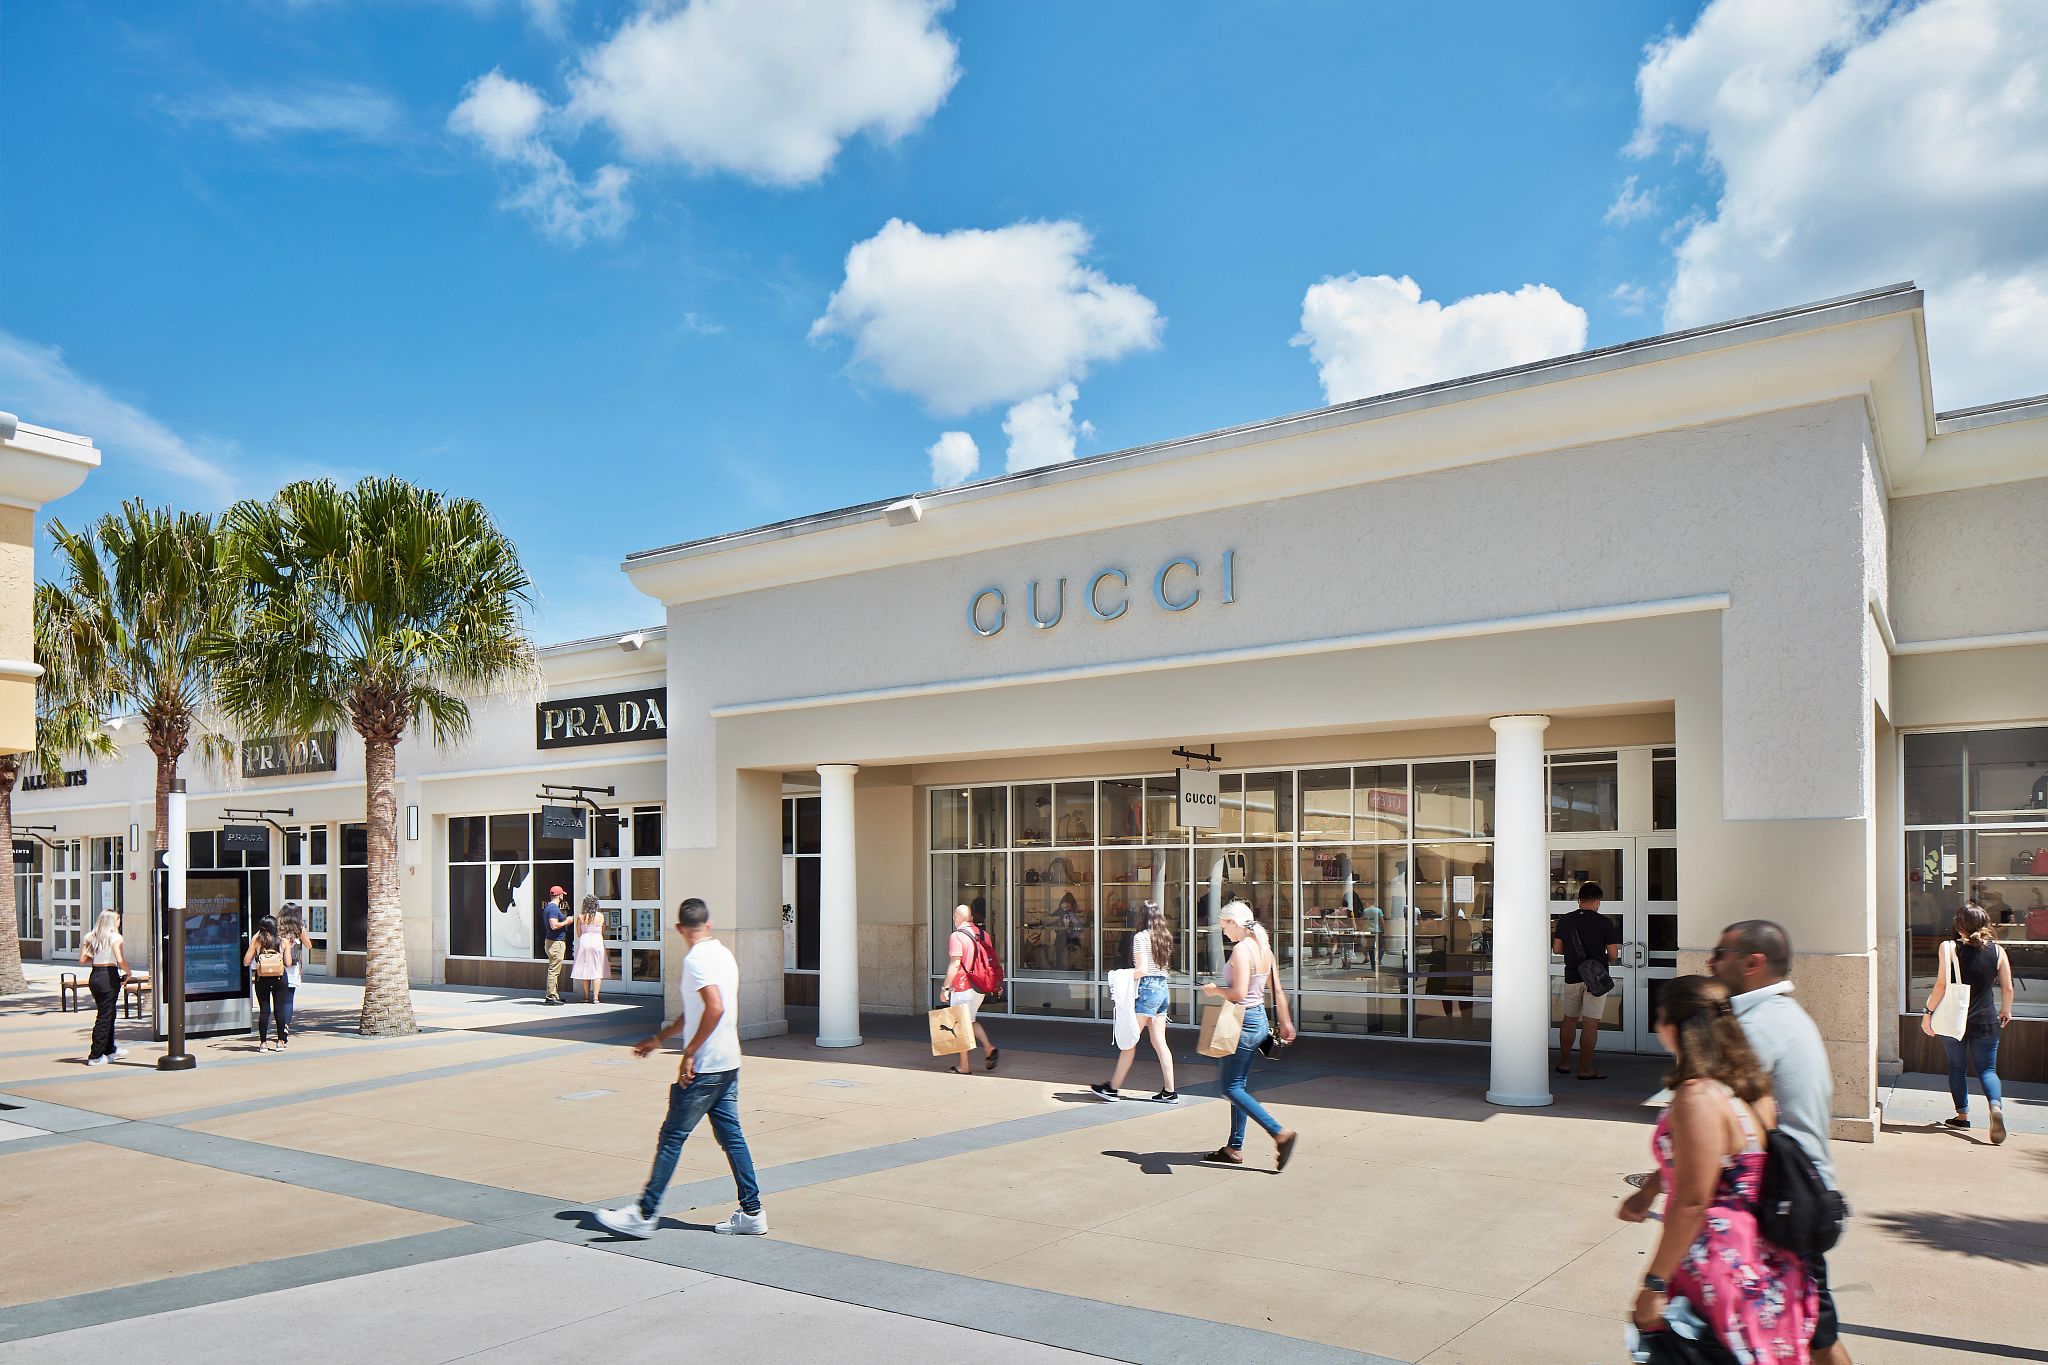 Shopping at the Gucci Outlet In Orlando Luxury Vlog 